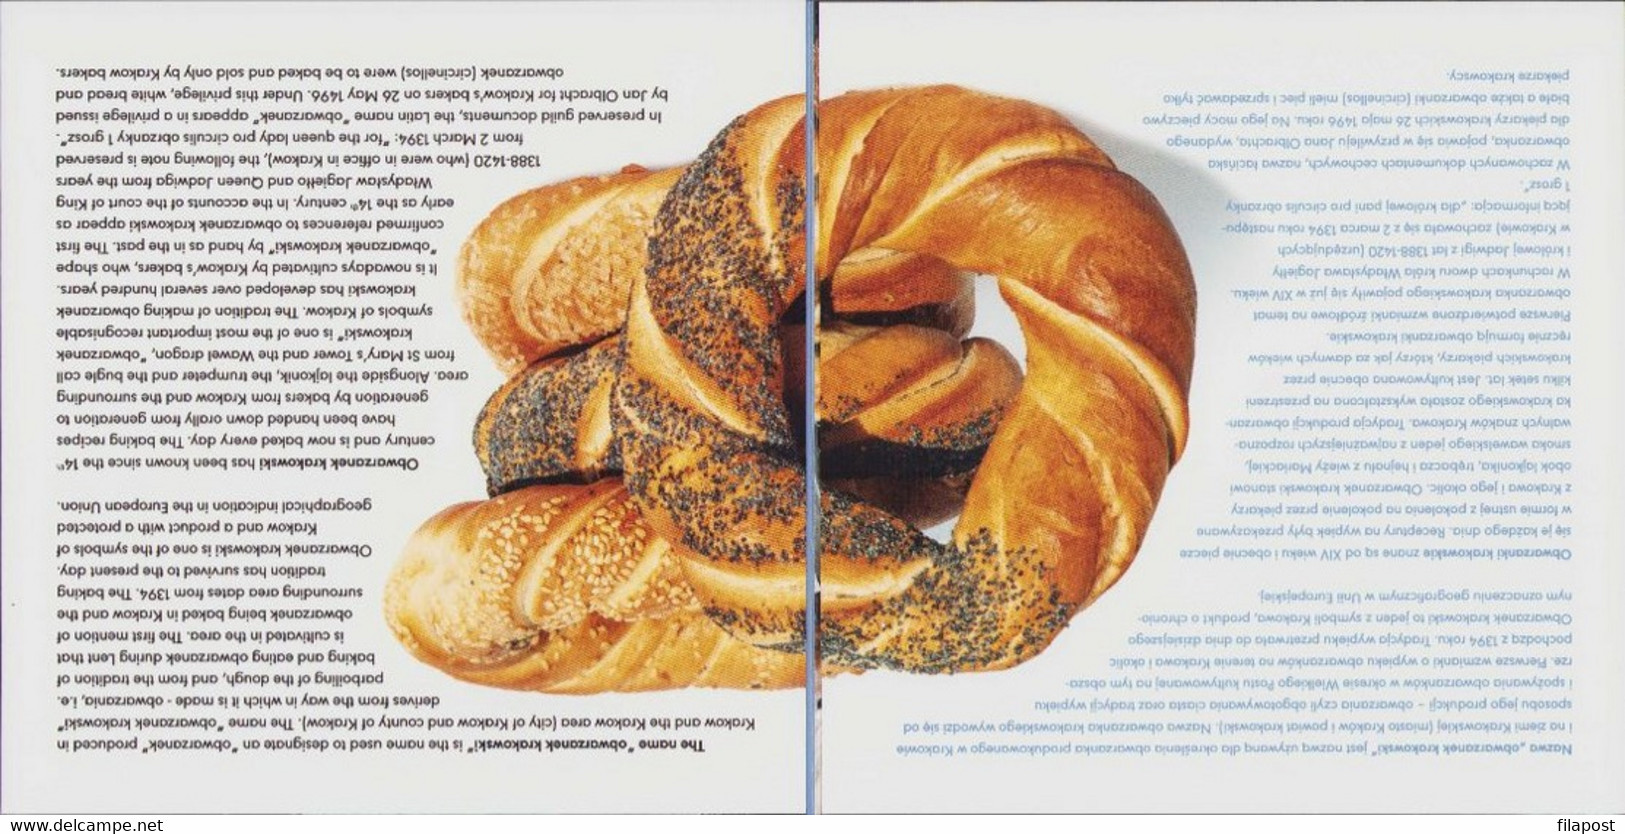 Poland 2022 Booklet / Polish Regional Products, Protected Geographical Indication, Food, Bagel, With Stamp MNH** - Markenheftchen